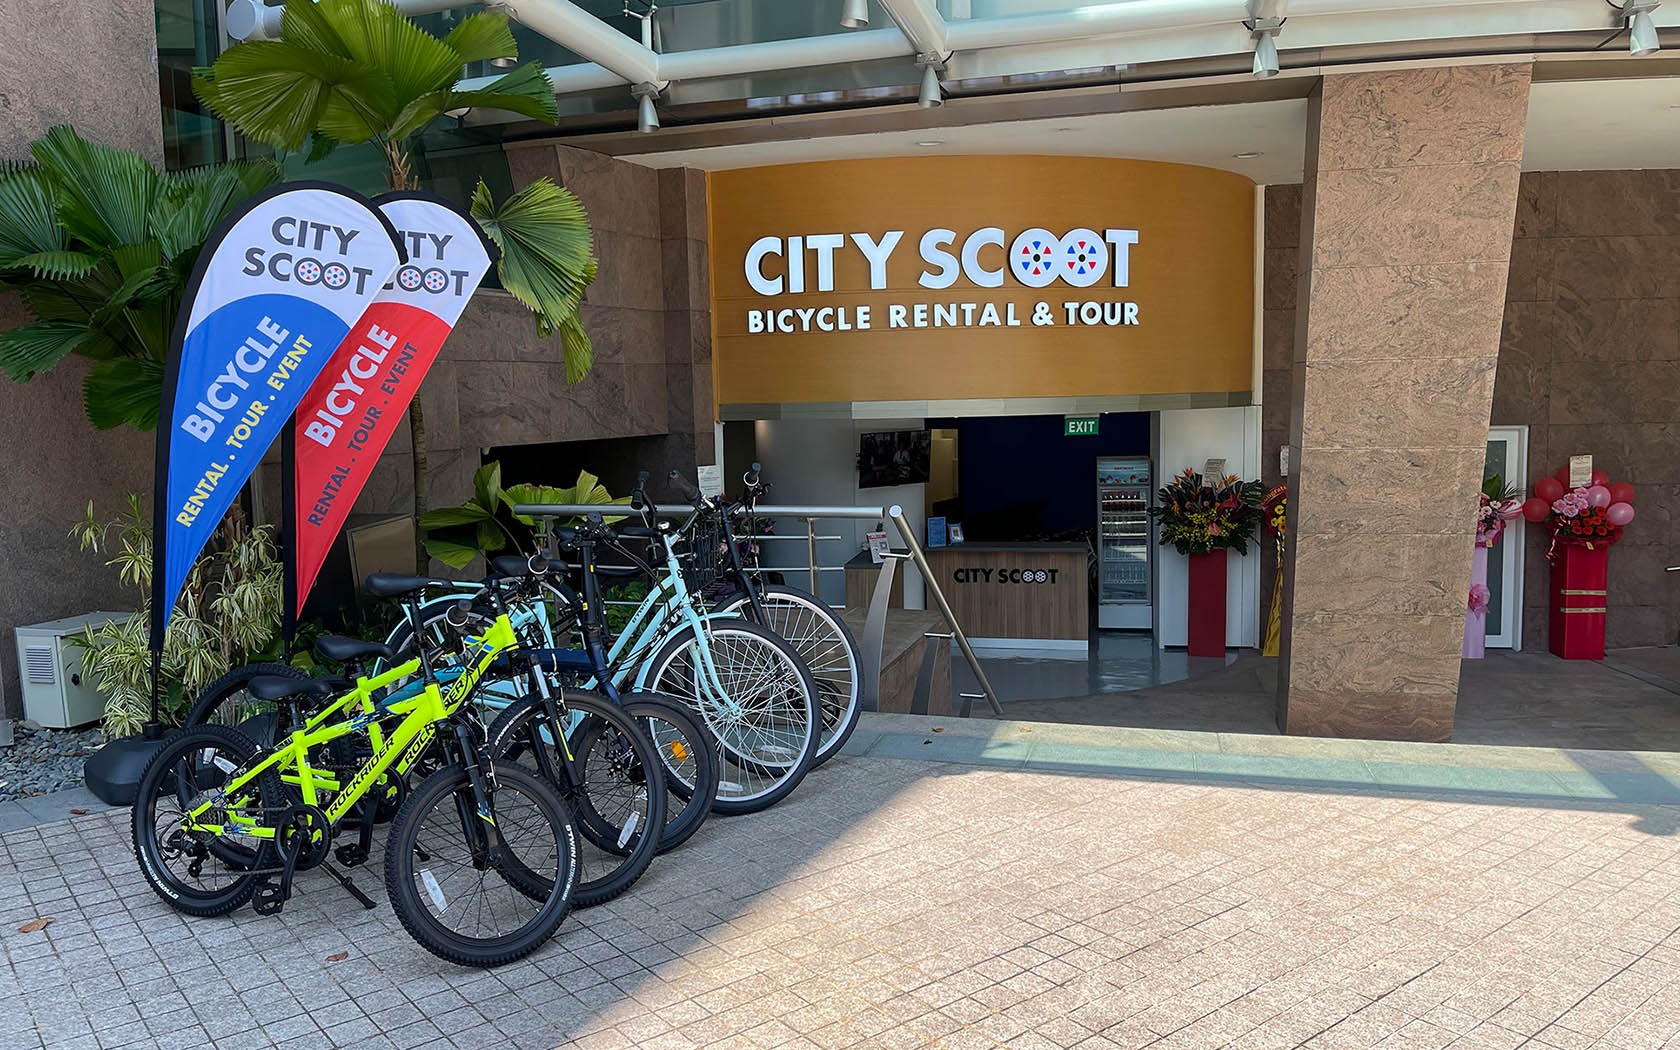 City Scoot storefront